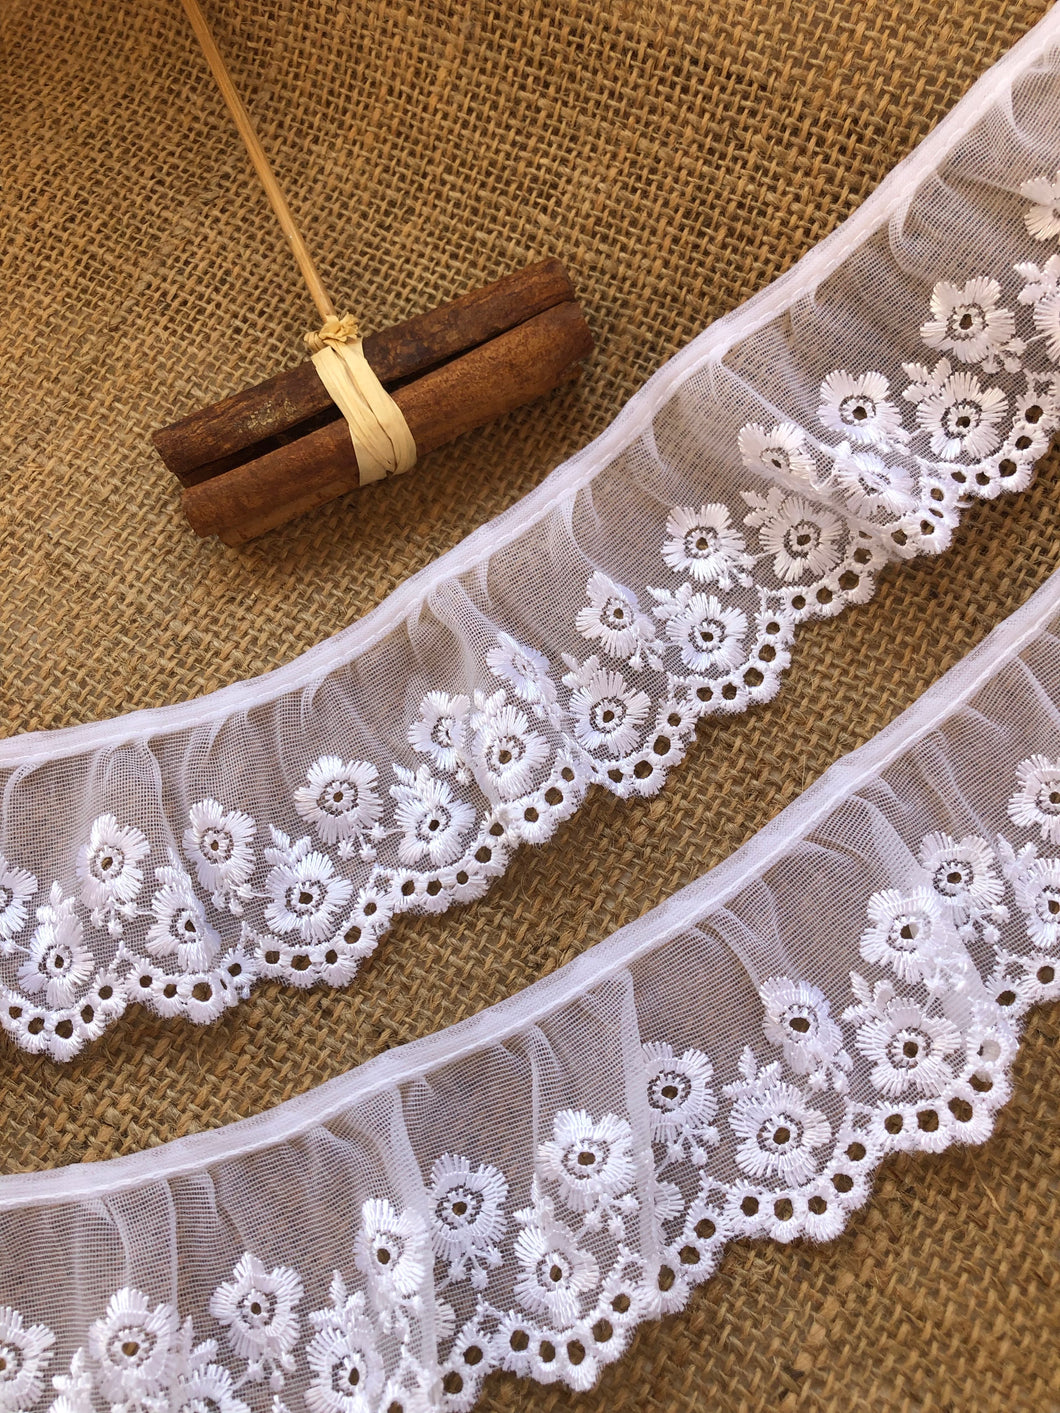 White Broderie Gathered Frilled Lace Trim 10 cm/4 – The Lace Co.